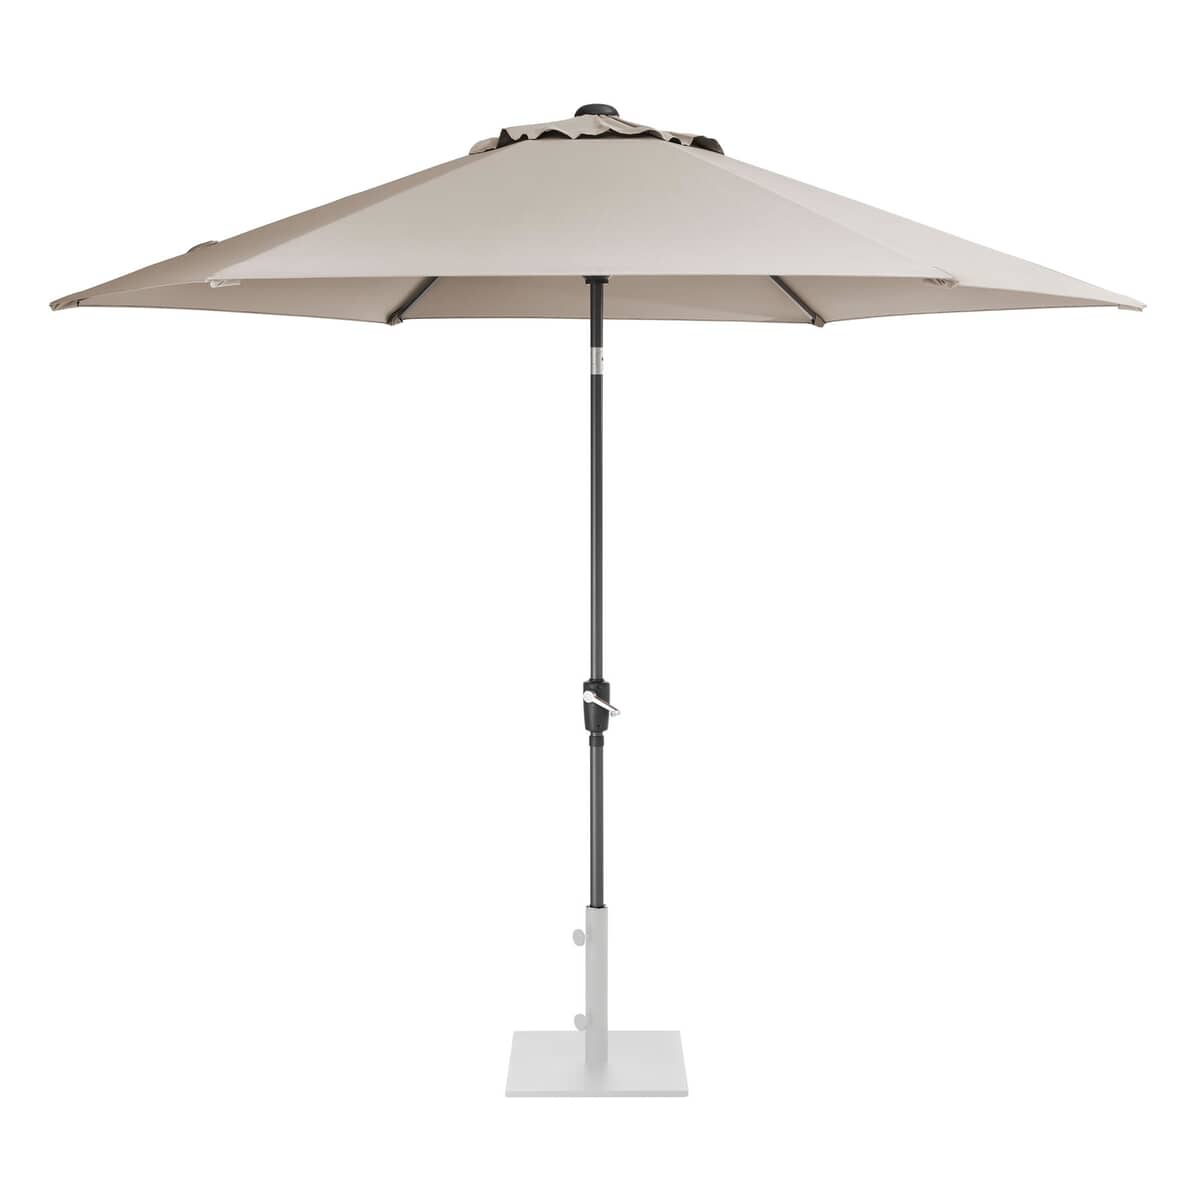 Kettler 3.0m Wind Up Parasol with tilt - Grey frame and Stone Canopy